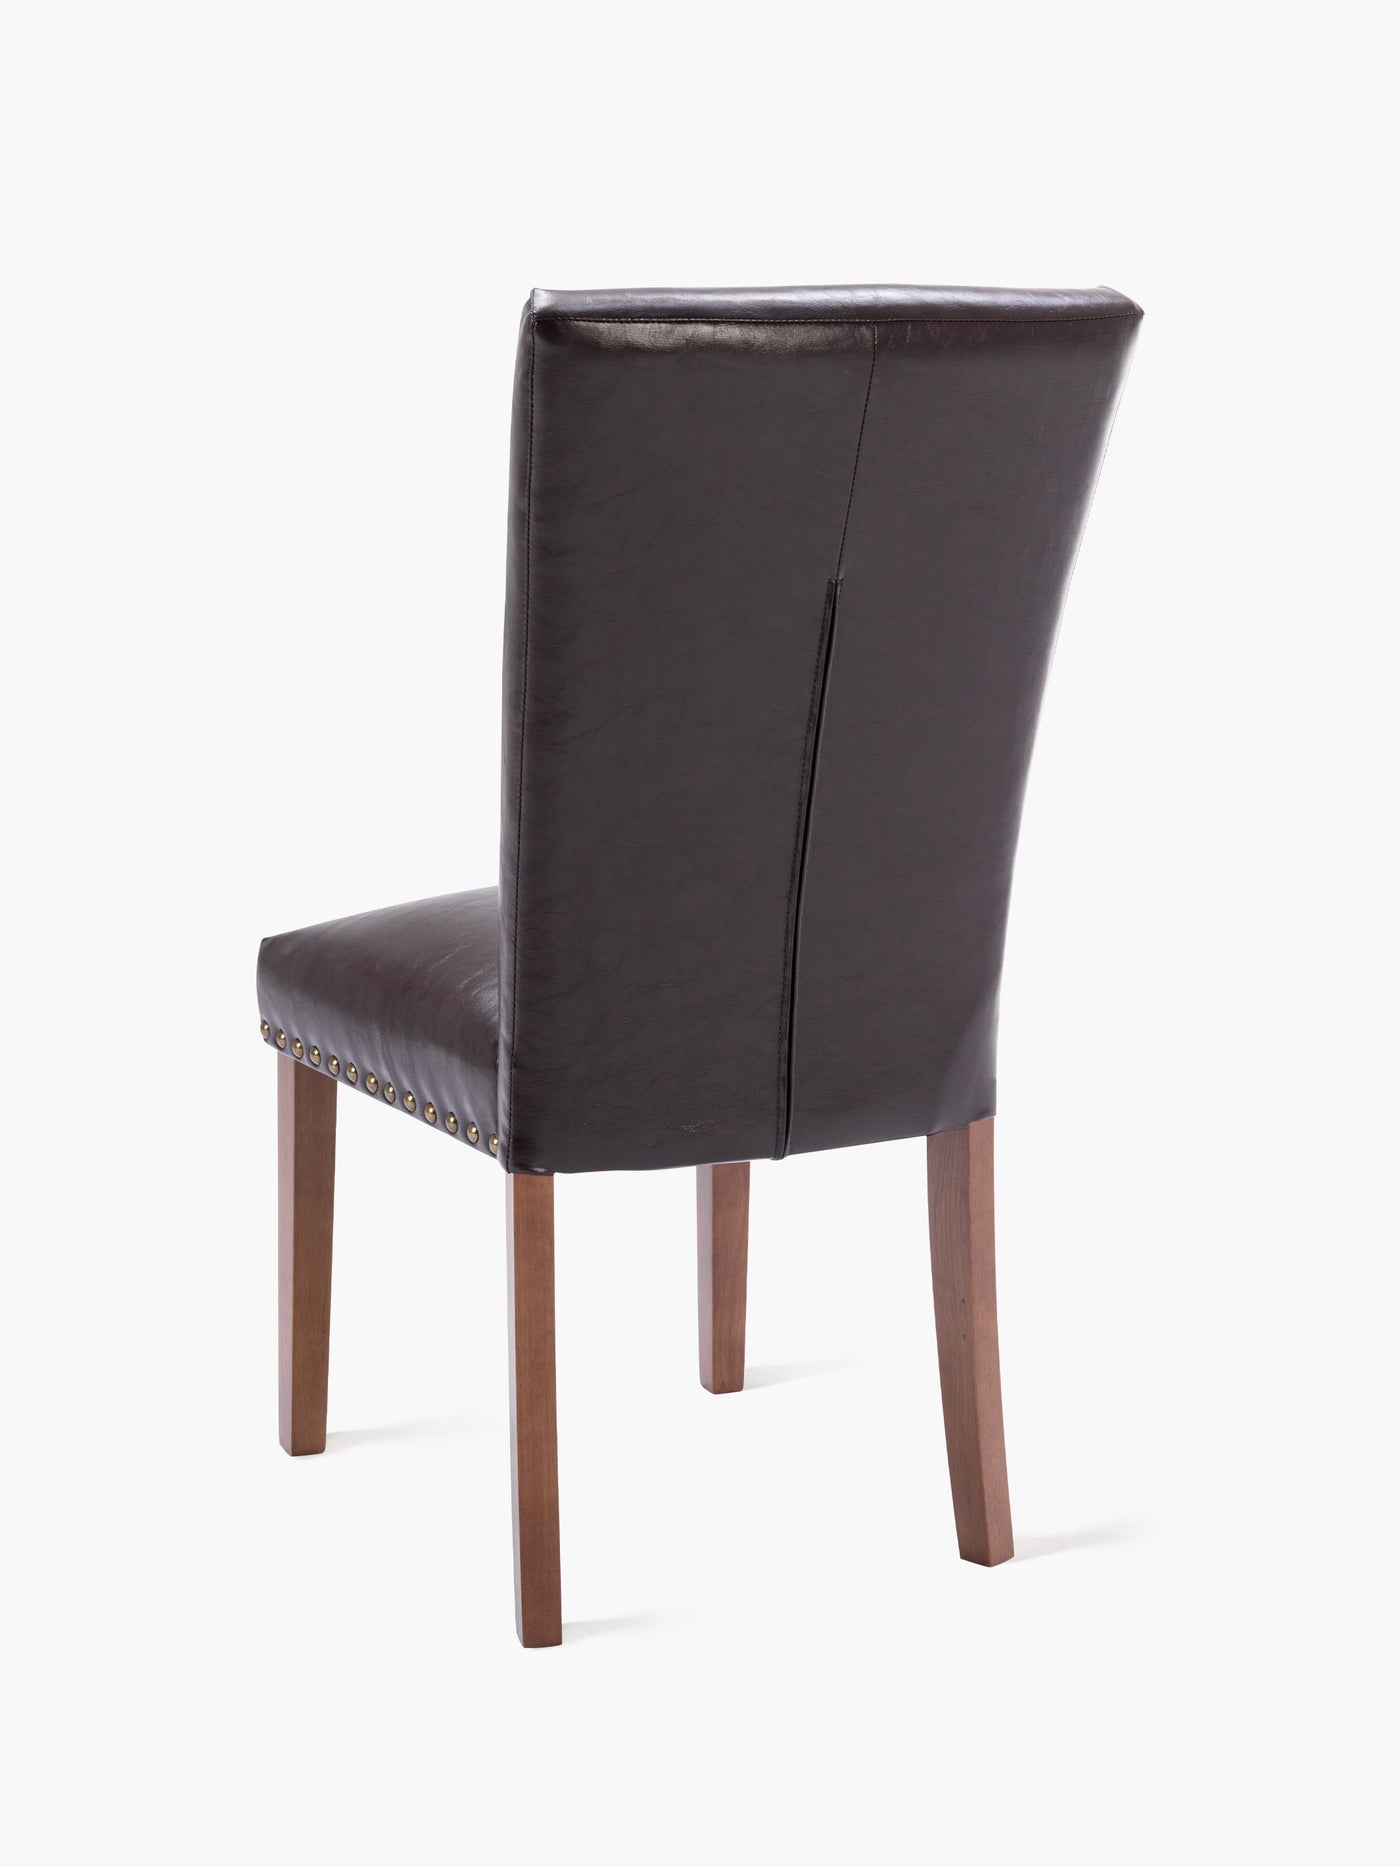 COLAMY Fabric Dining Chair CL420 Dark Brown #color_darkbrown